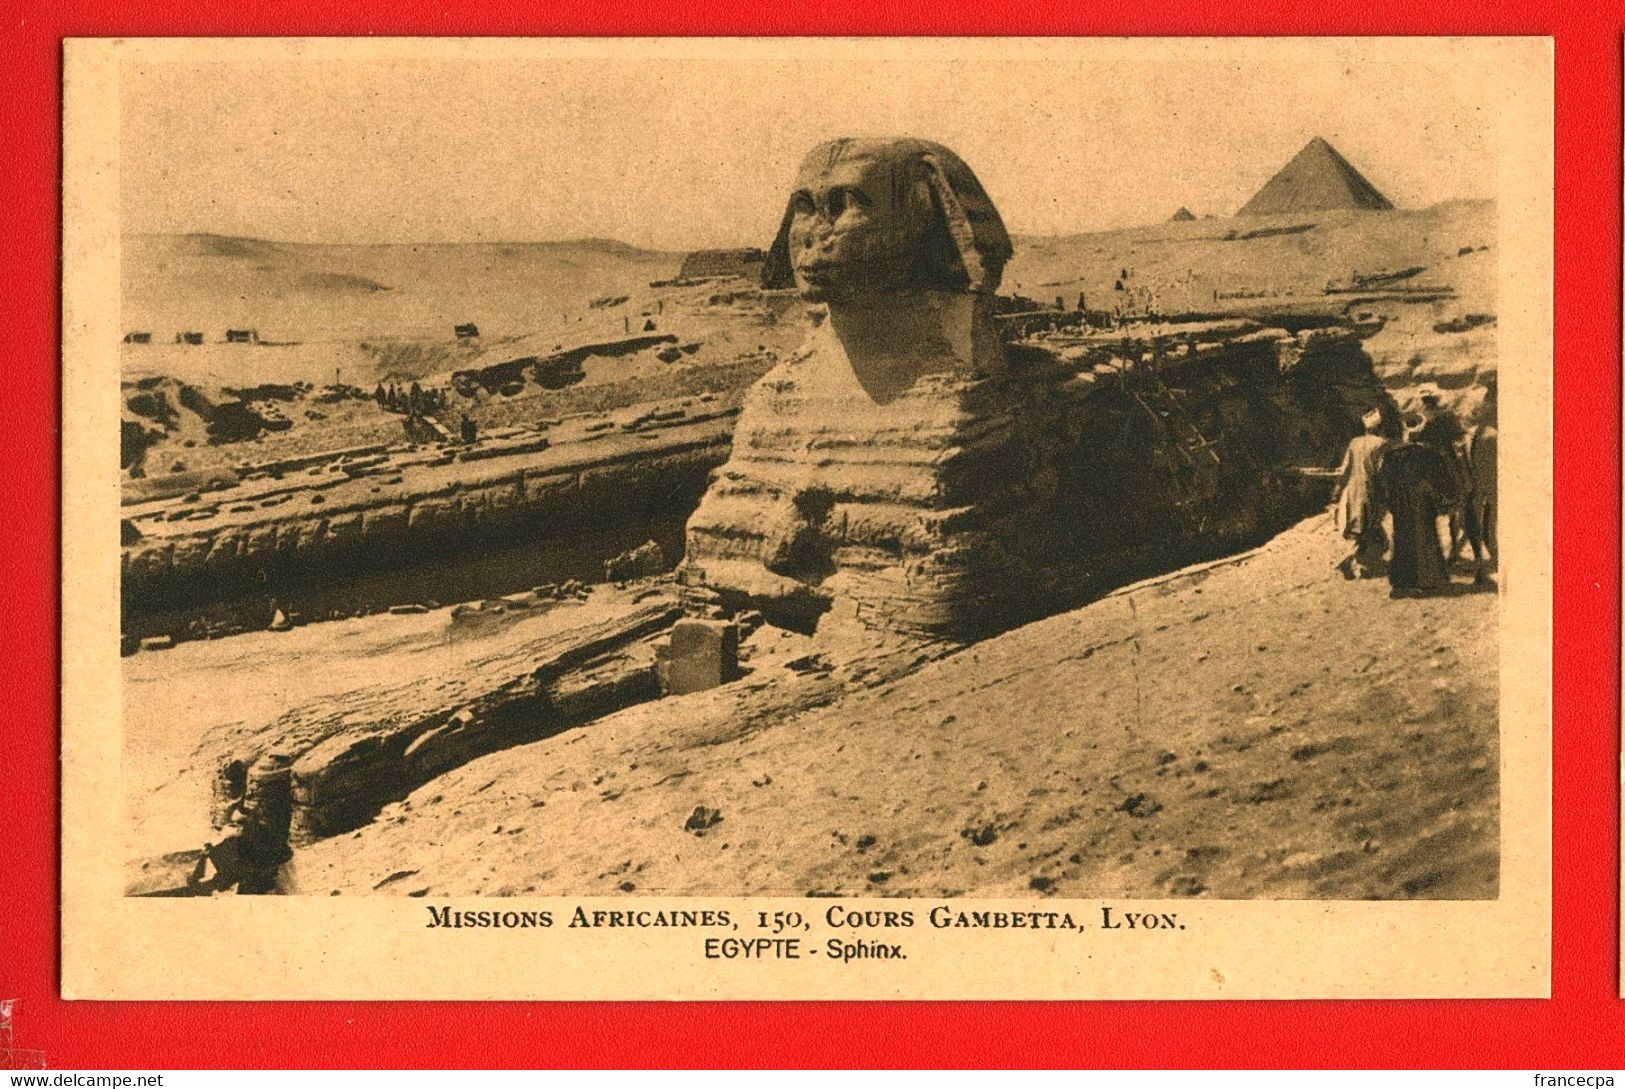 10276 - EGYPTE - MISSION AFRICAINES - Sphinx - Sphinx